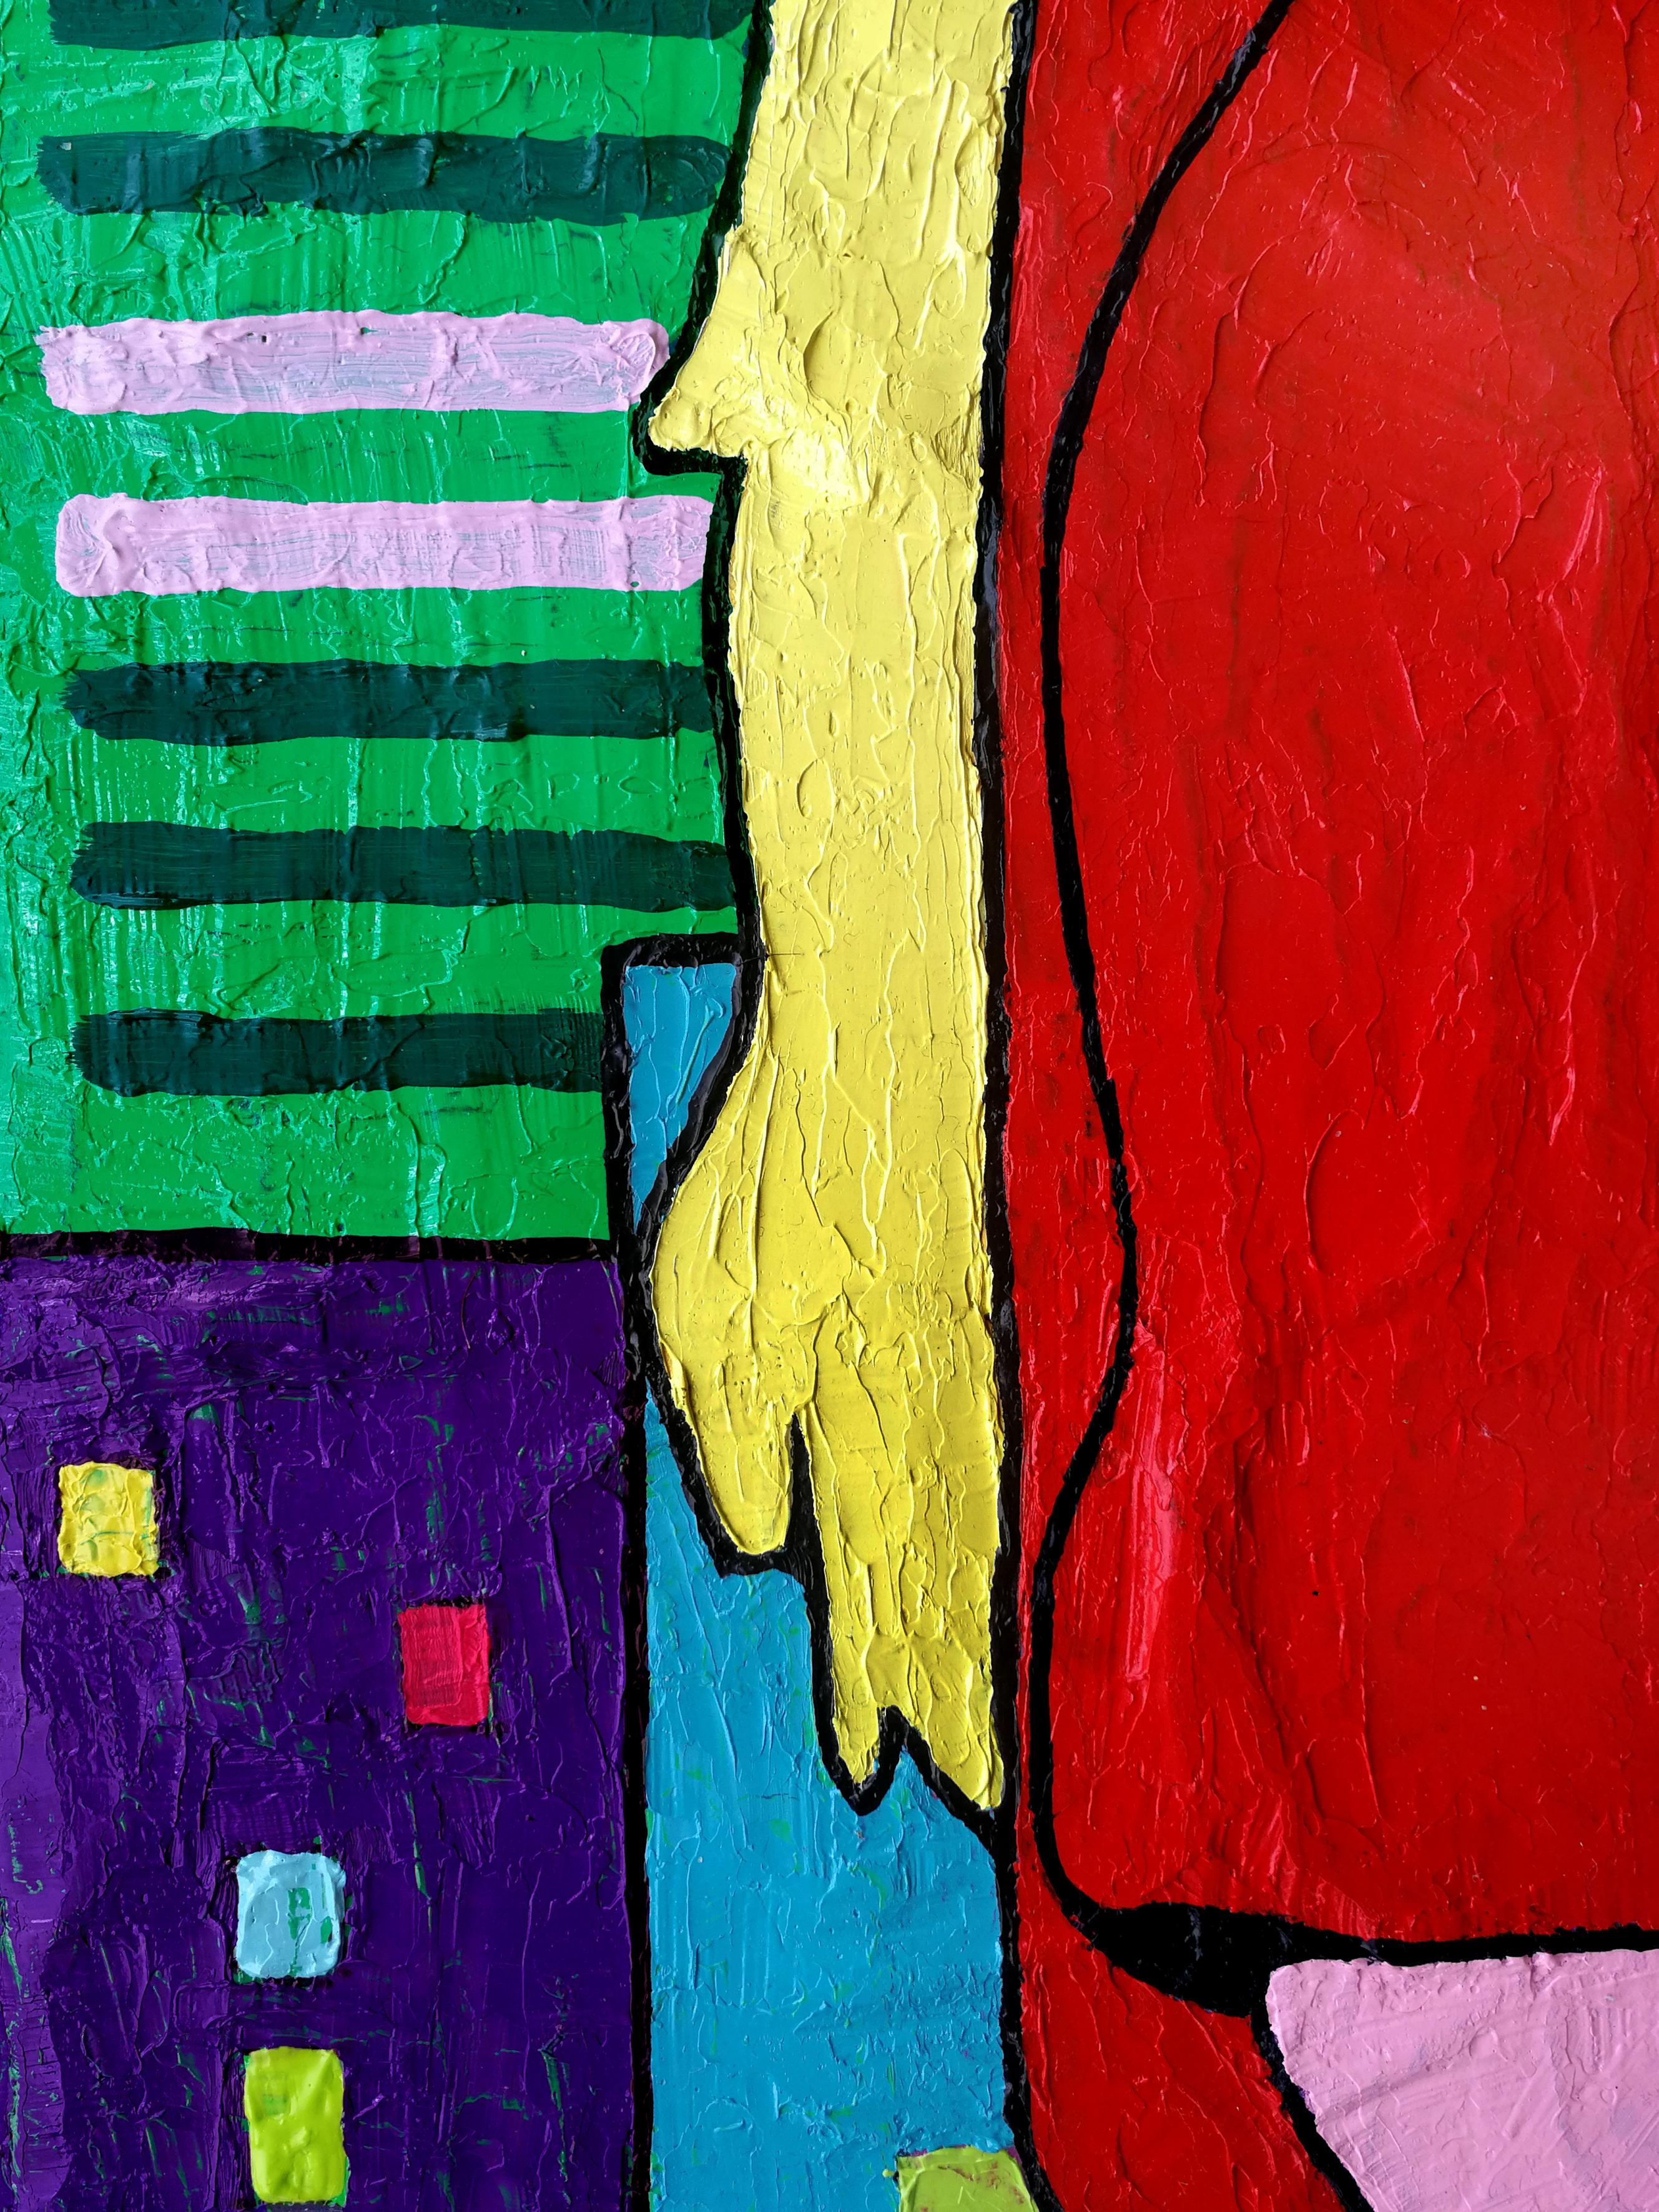 On the Corner Against the Wall of Windows - Red Yellow Green White Blue Purple - Pop Art Painting by Vlado Vesselinov